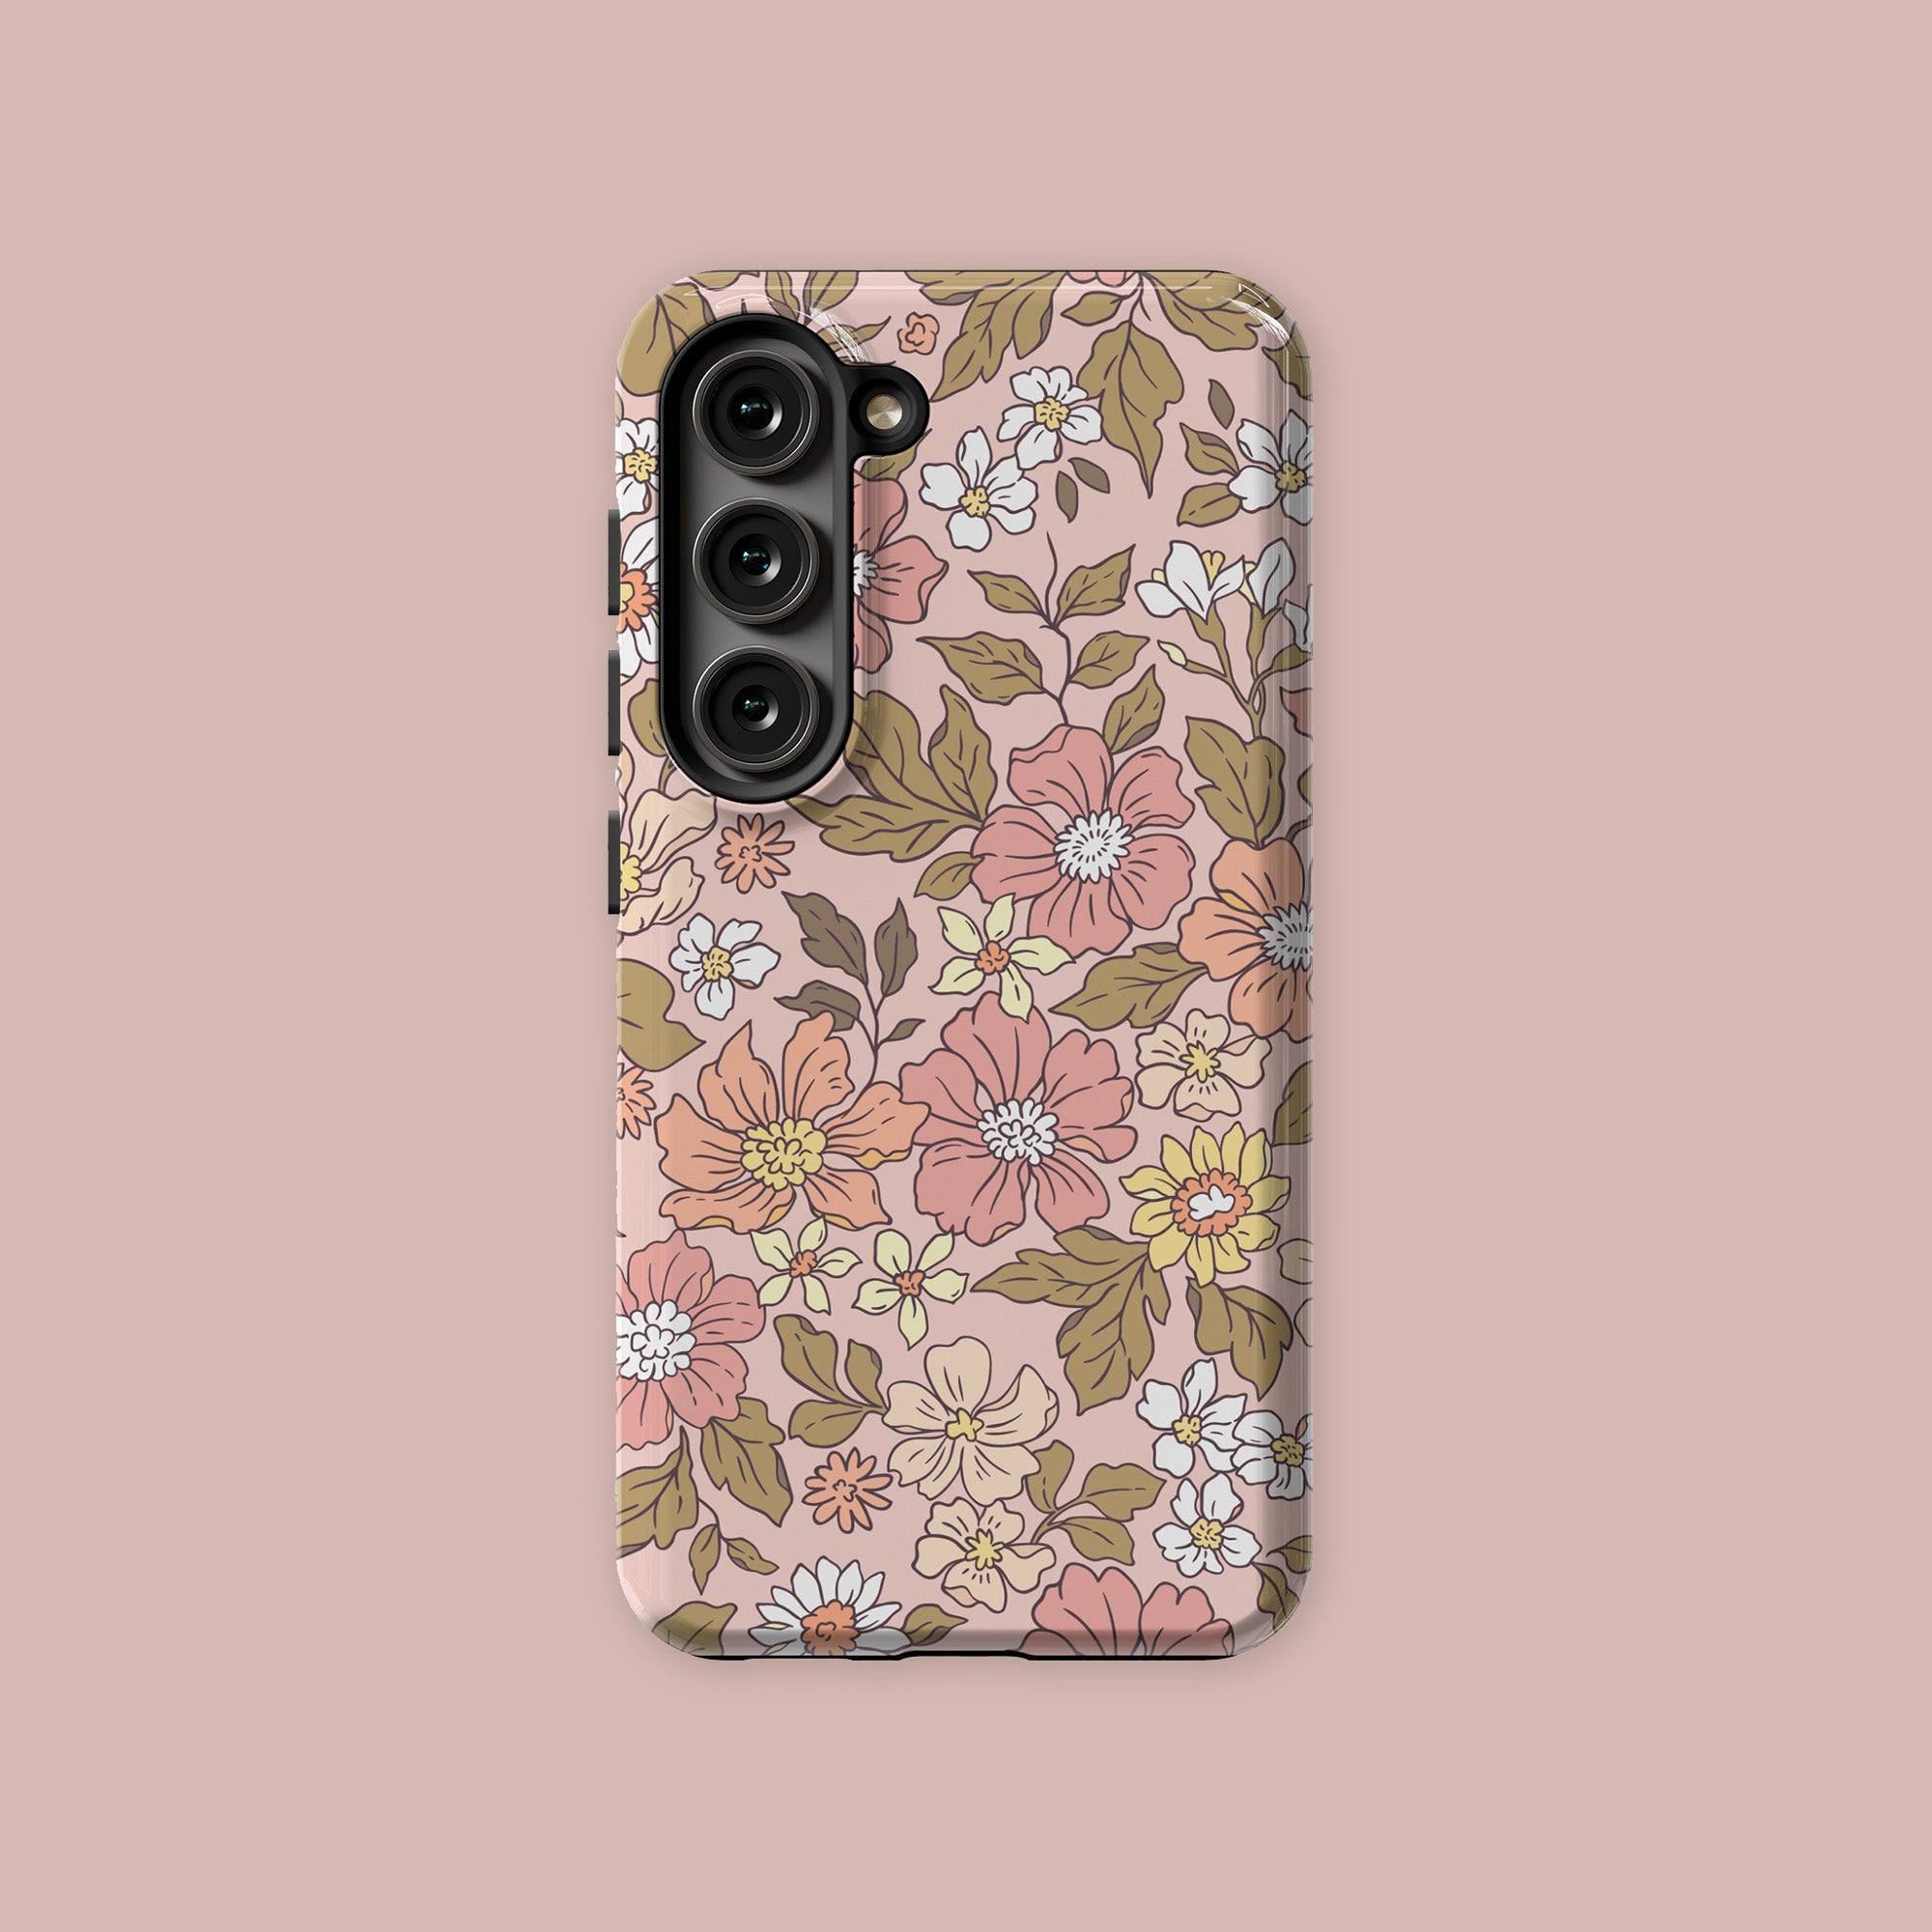 Cute Protective Colorful Flowers Phone Case, iPhone, Samsung